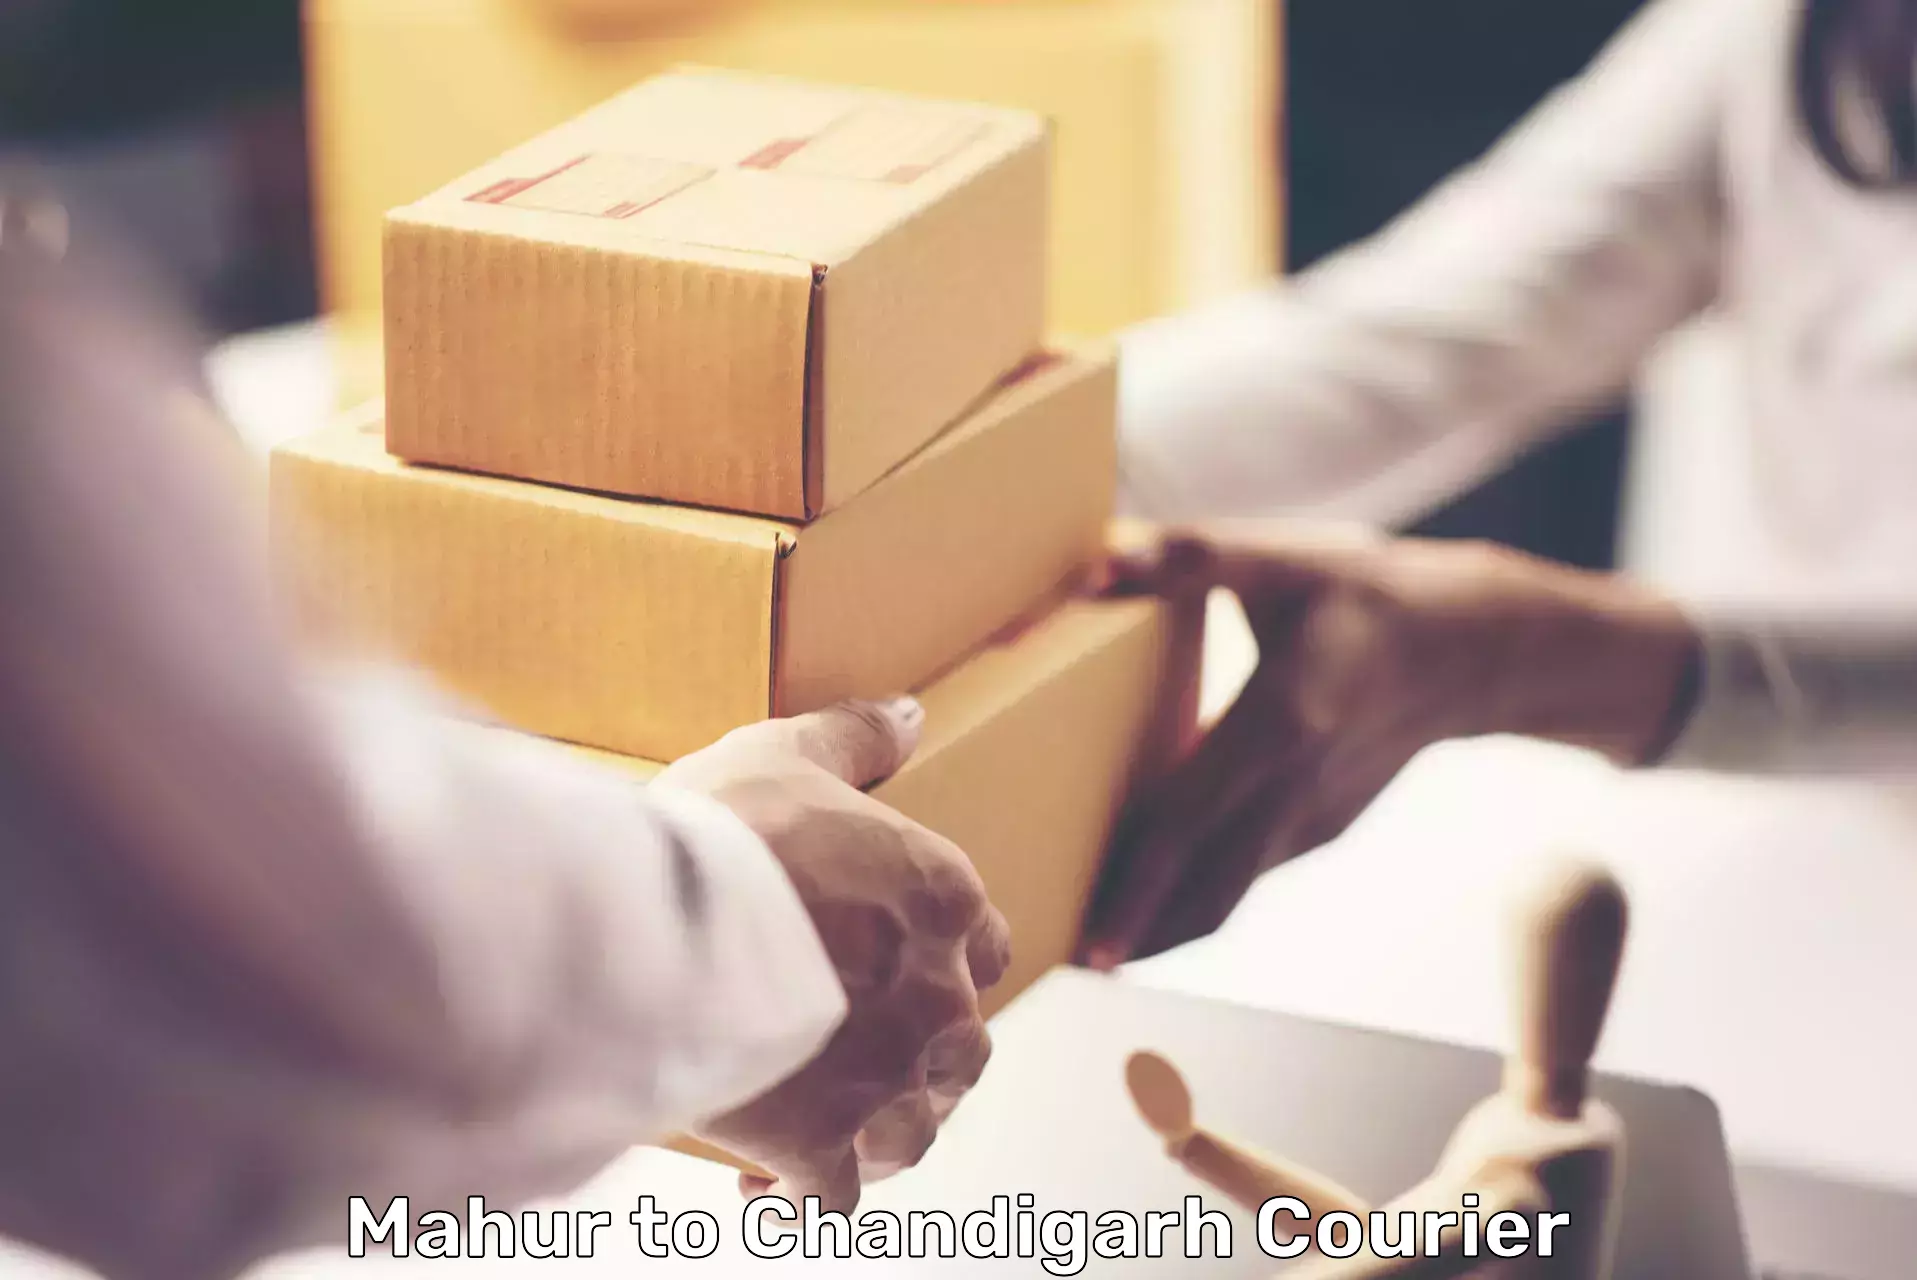 Online package tracking Mahur to Chandigarh